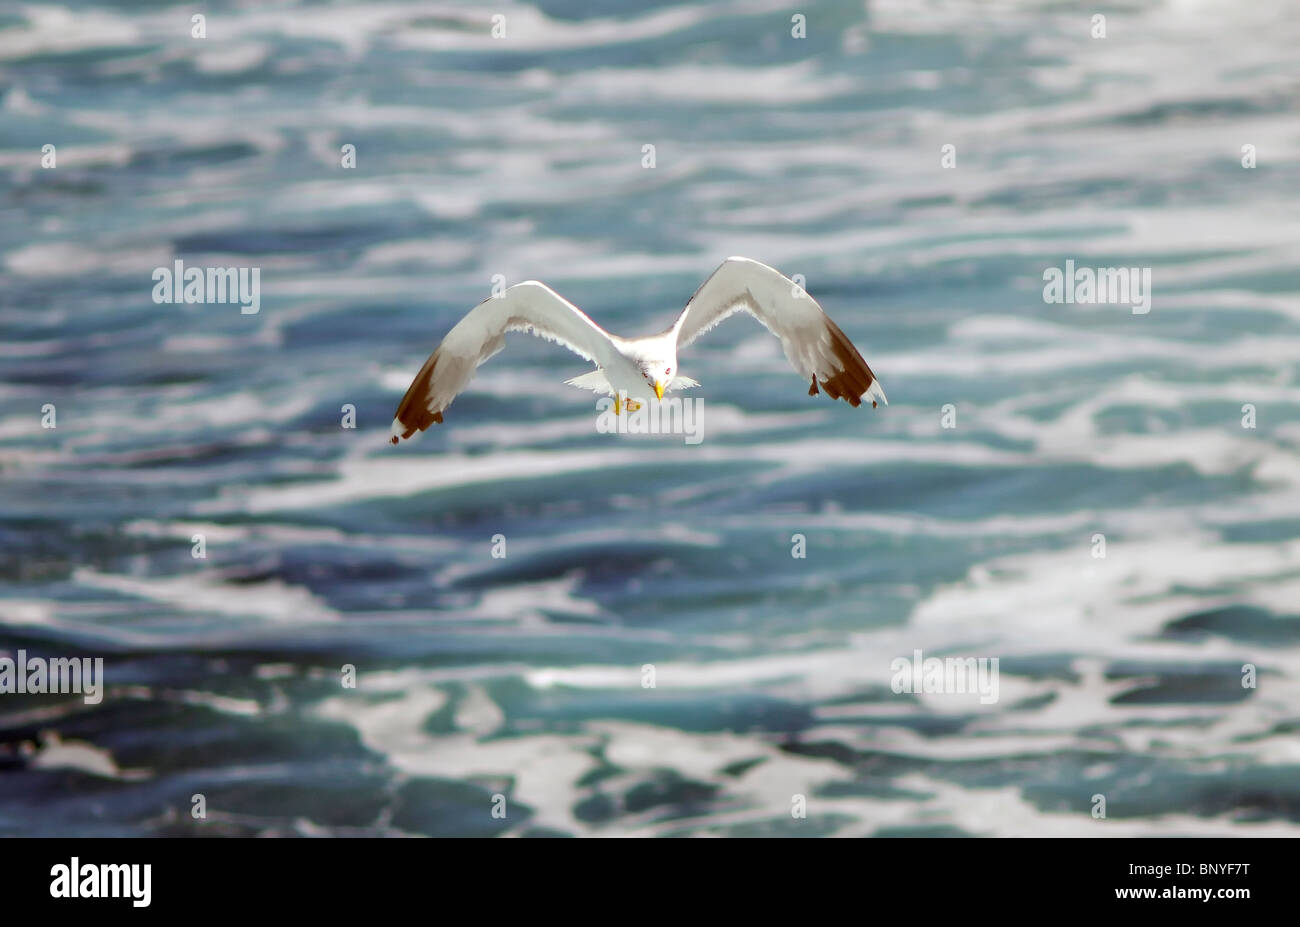 Seagull flying trough the Adriatic Sea Stock Photo